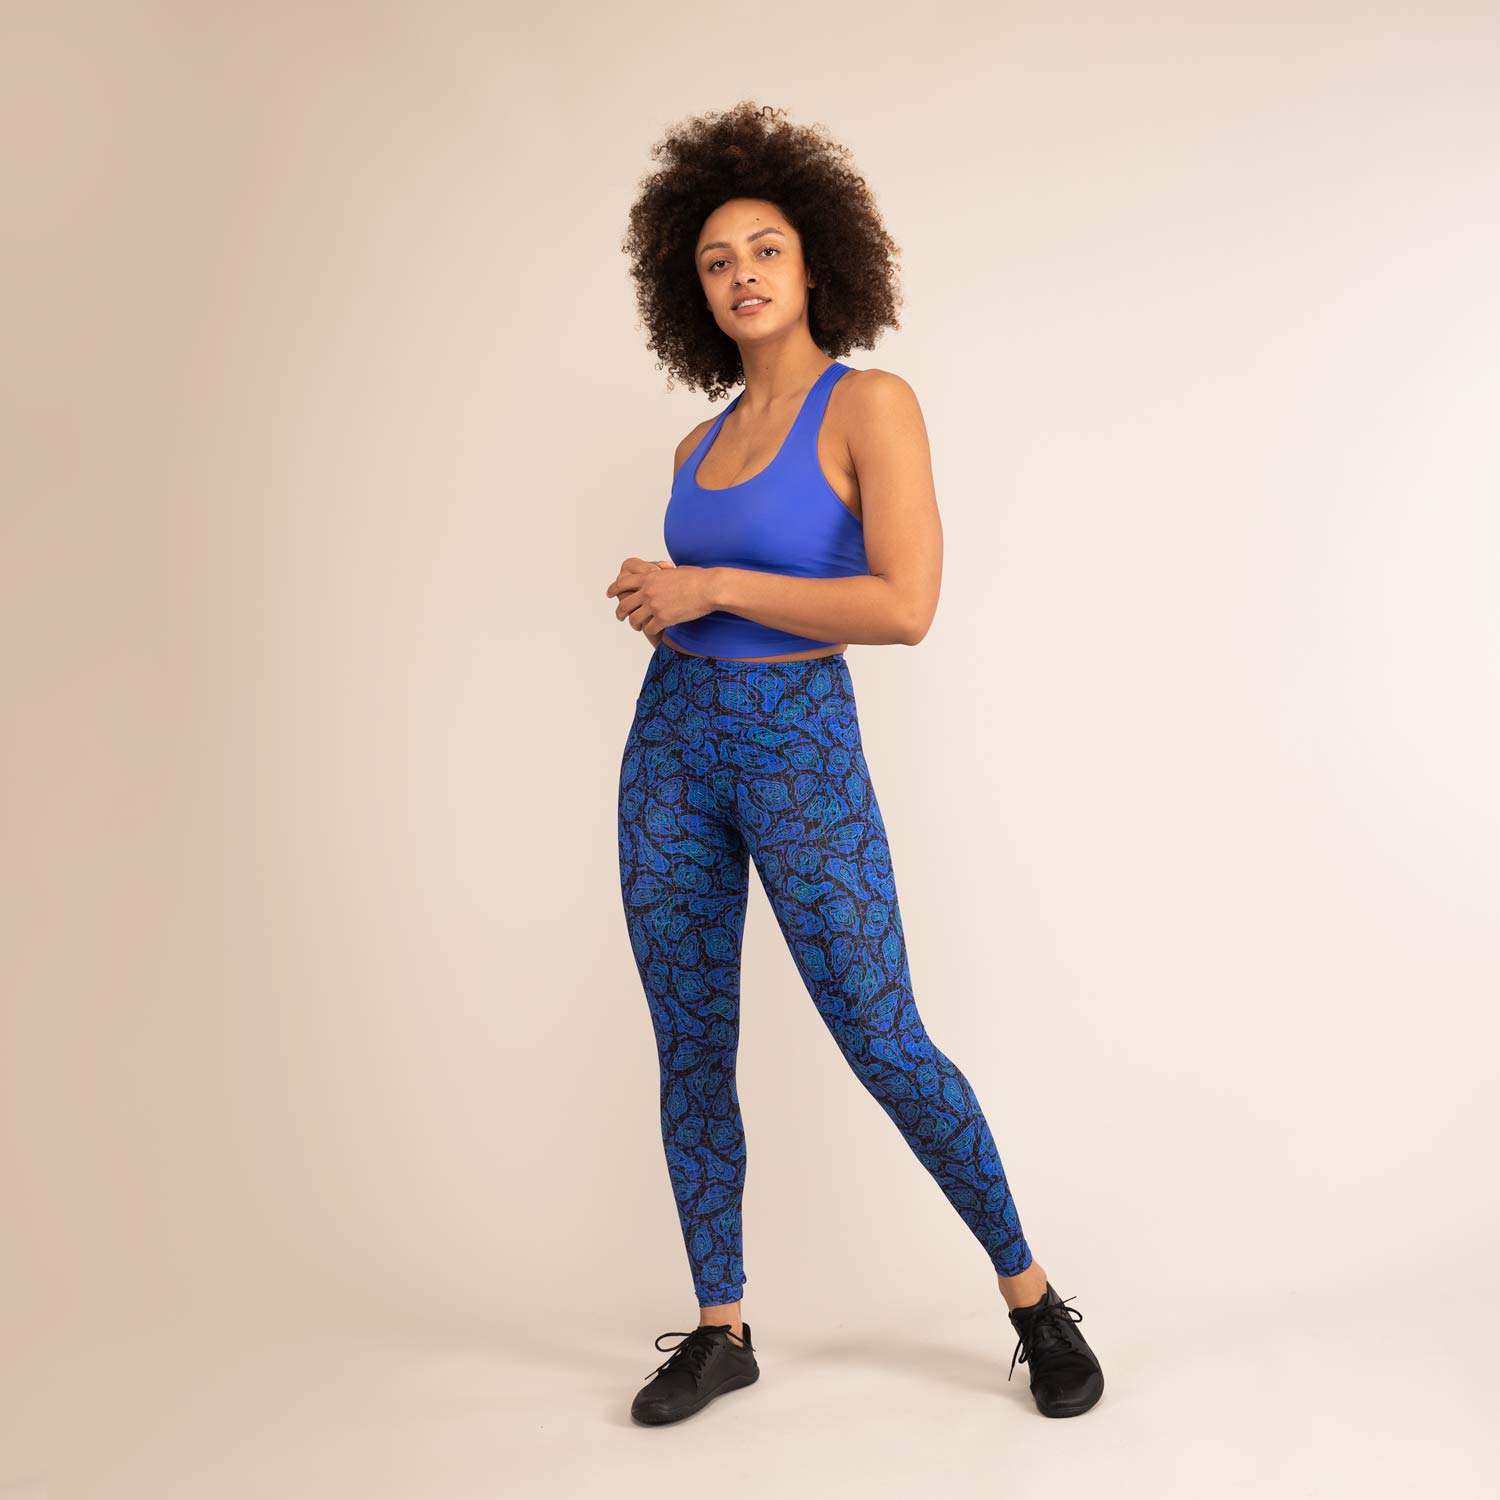 TITAN GEO JAGUAR LEGGINGS | Printed Recycled Leggings | 3RD ROCK Clothing -  Kendal is 5ft 7 with a 28" waist, 38" hips and wears a size 12 F